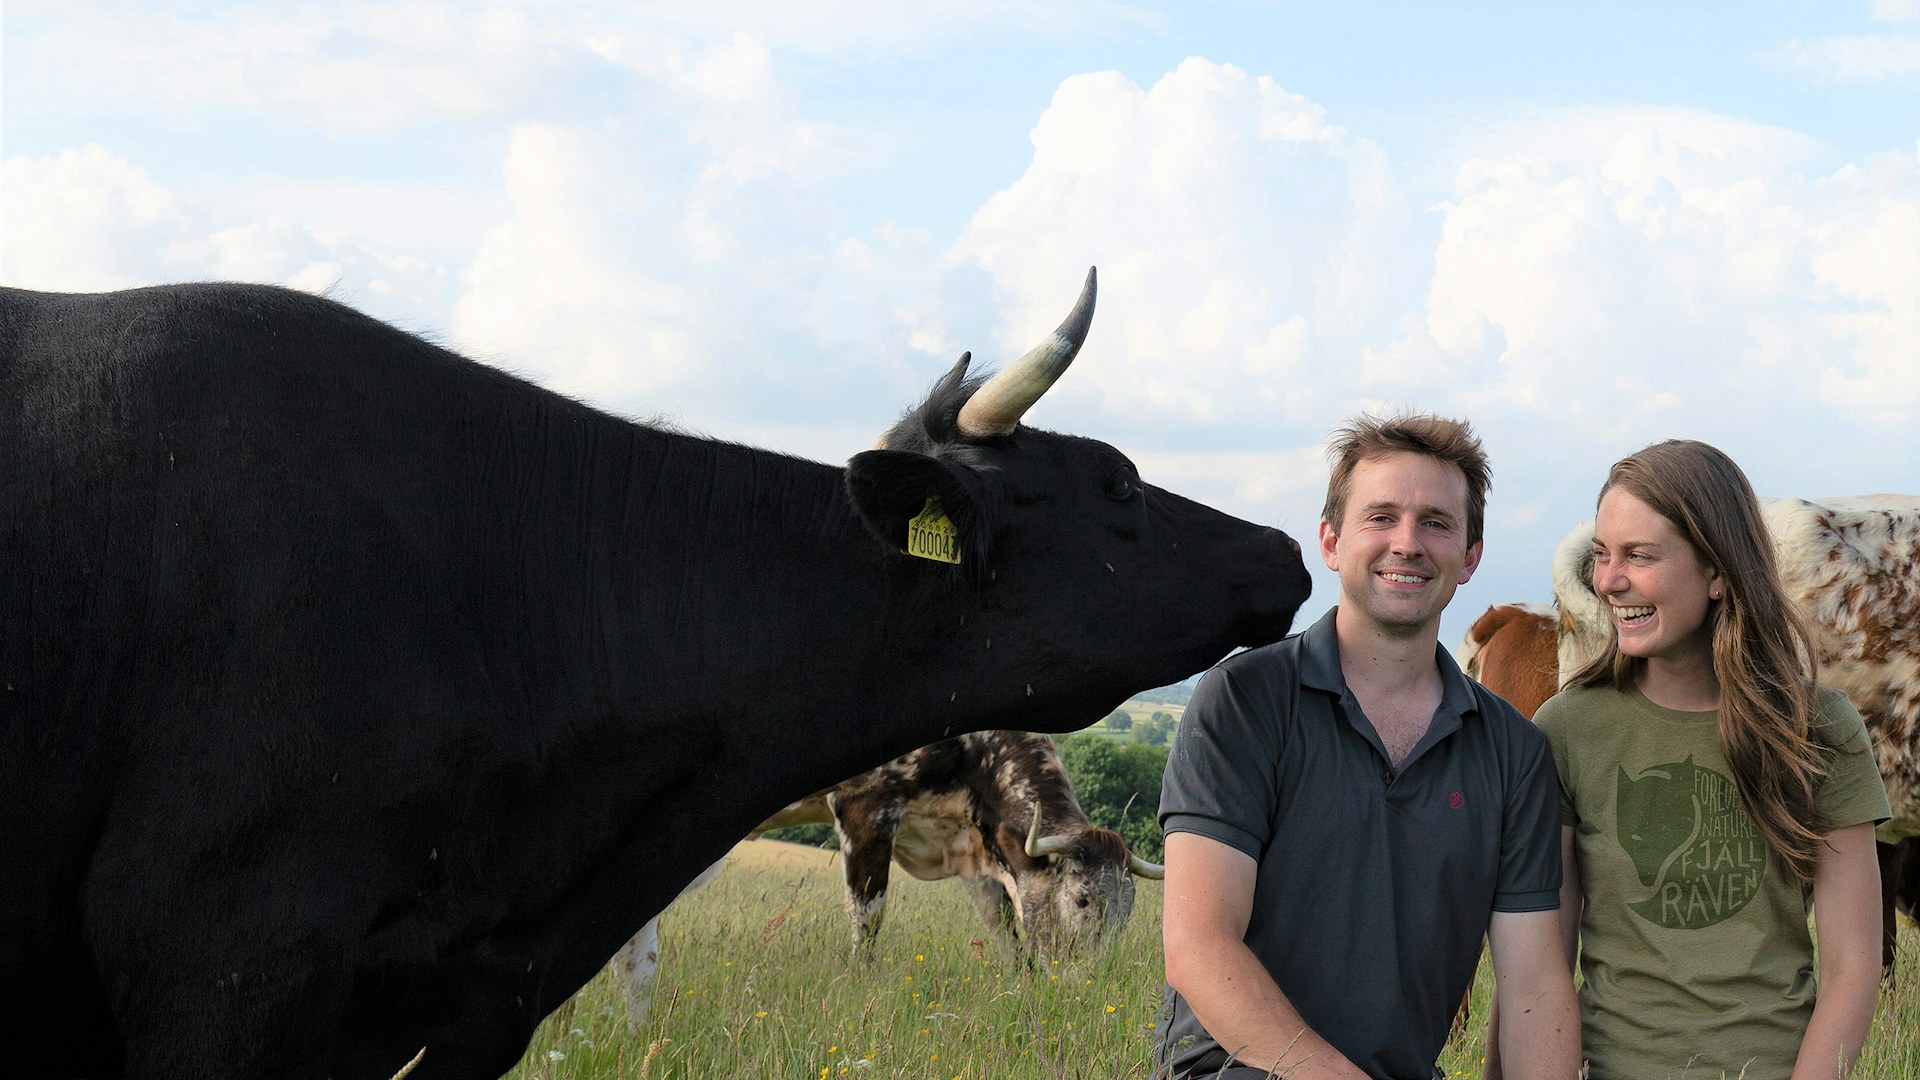 Horned beef company owners in field with cow